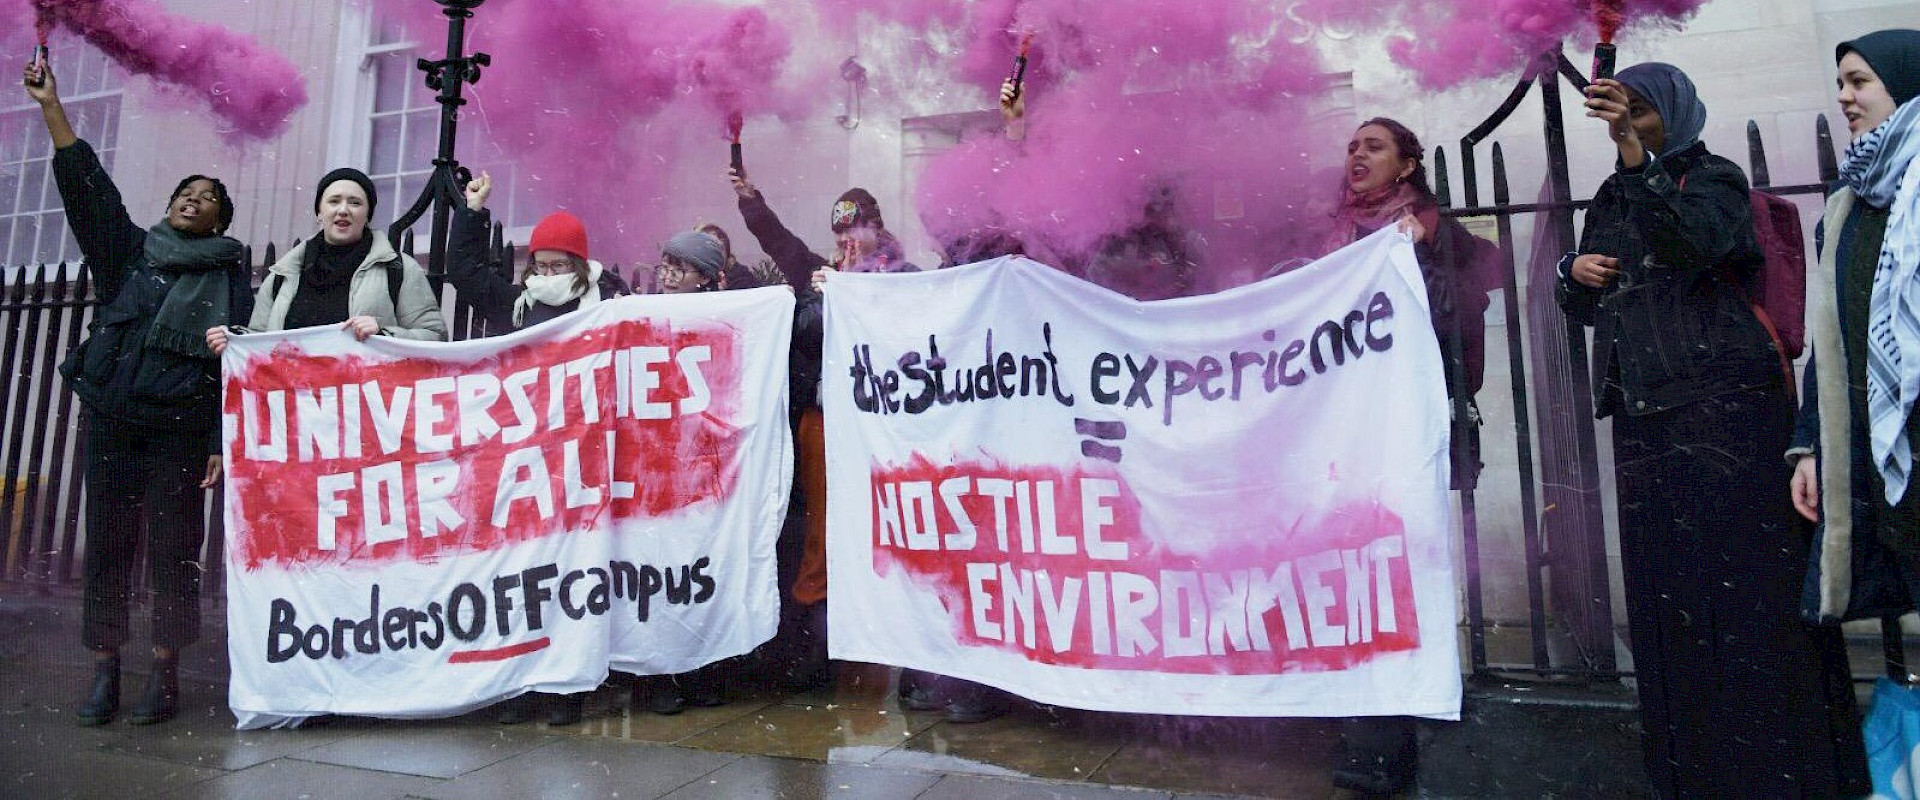 Crowd of students holding up banners reading "Universities for all: Borders Off Campus: Hostile Environment" with pink flares